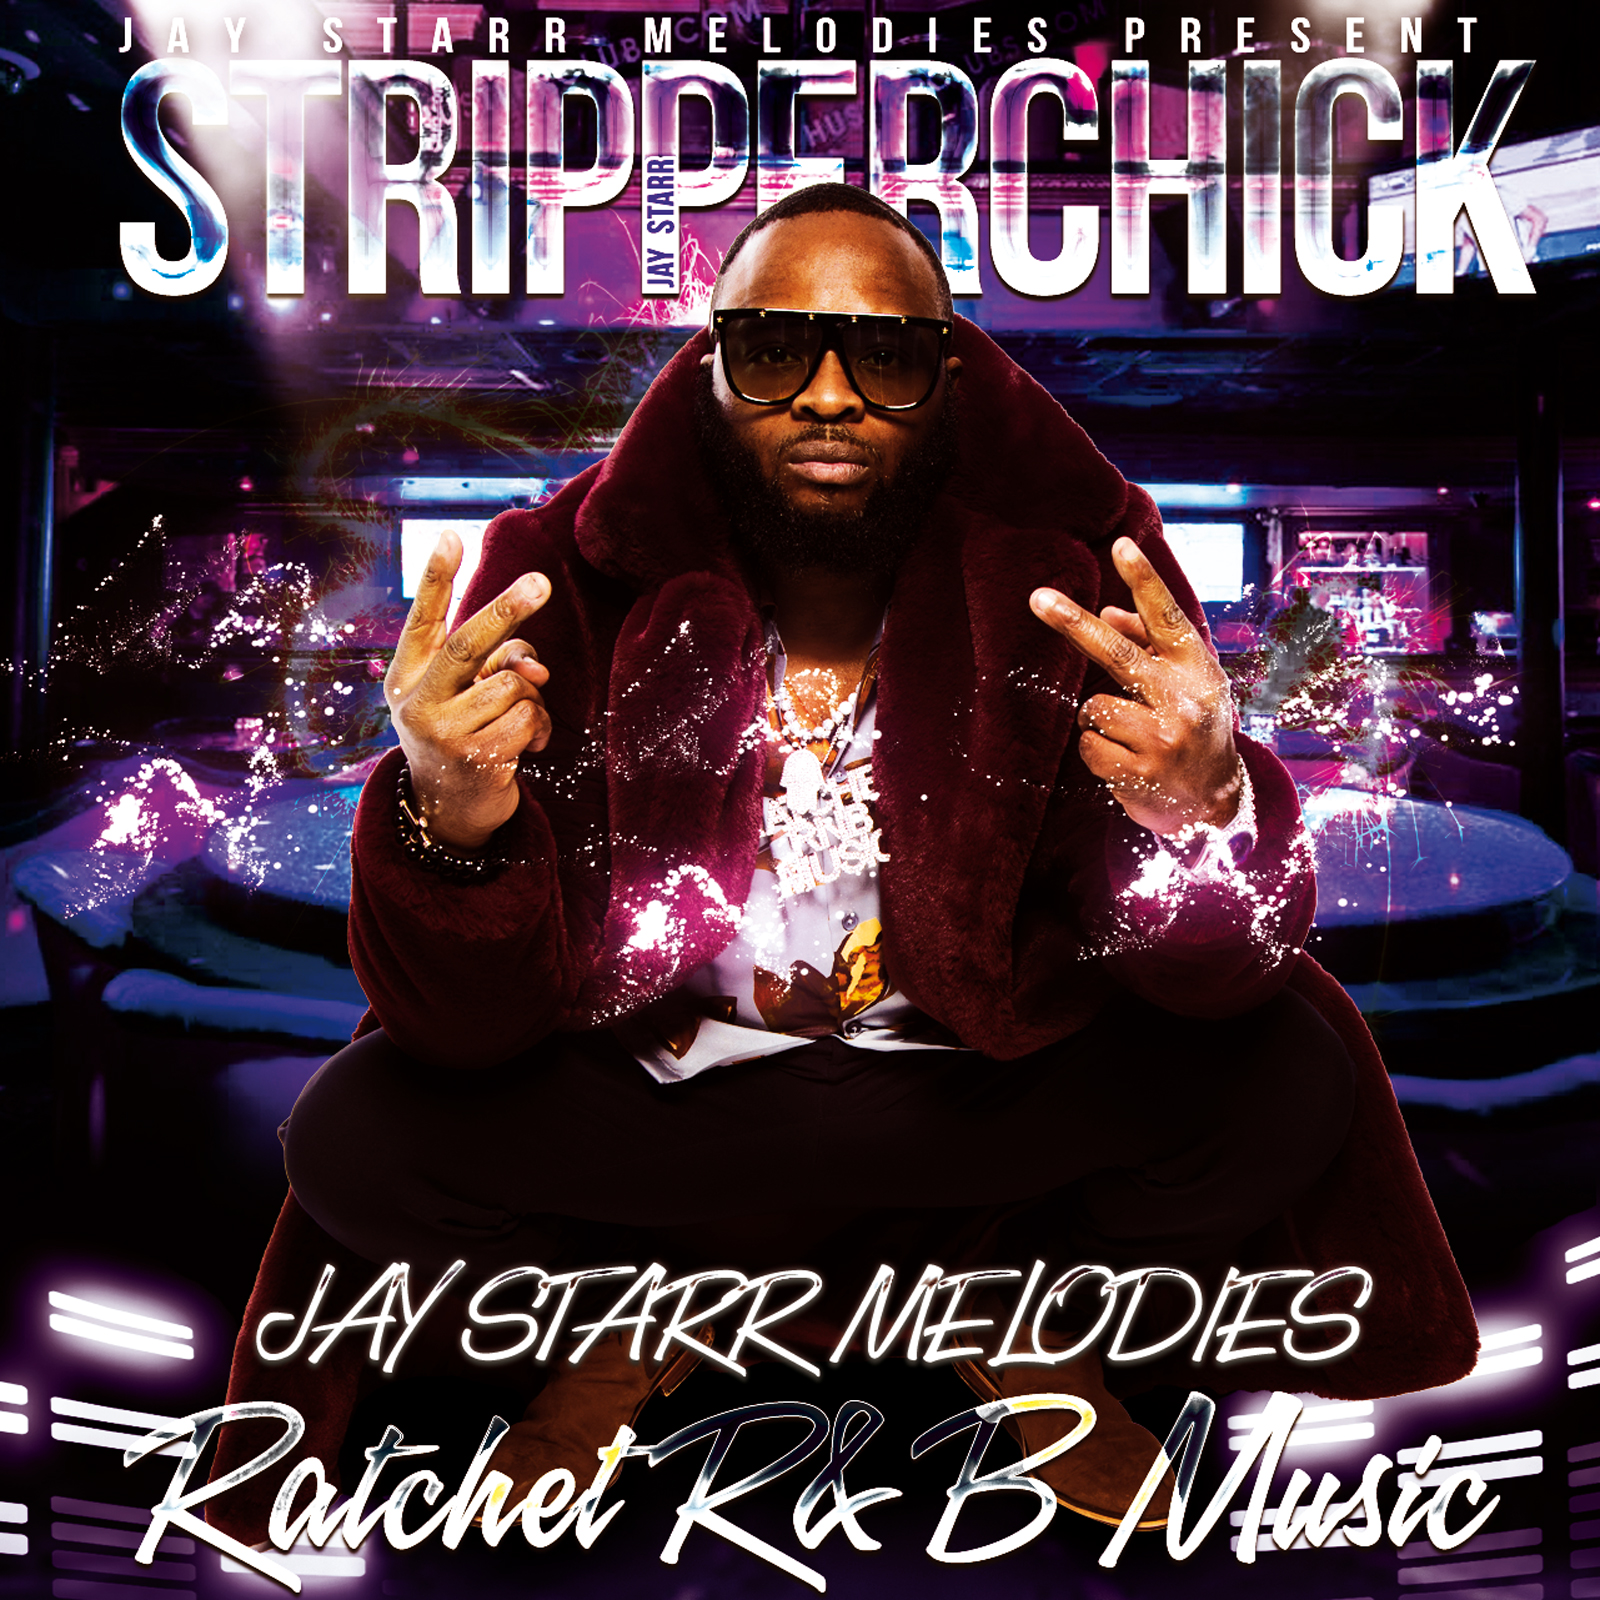 Curating a compelling and intimate track that’ll elevate his self-titled strain of Ratchet R&B, ‘Jay Starr Melodies’ releases ‘Stripper Chick’